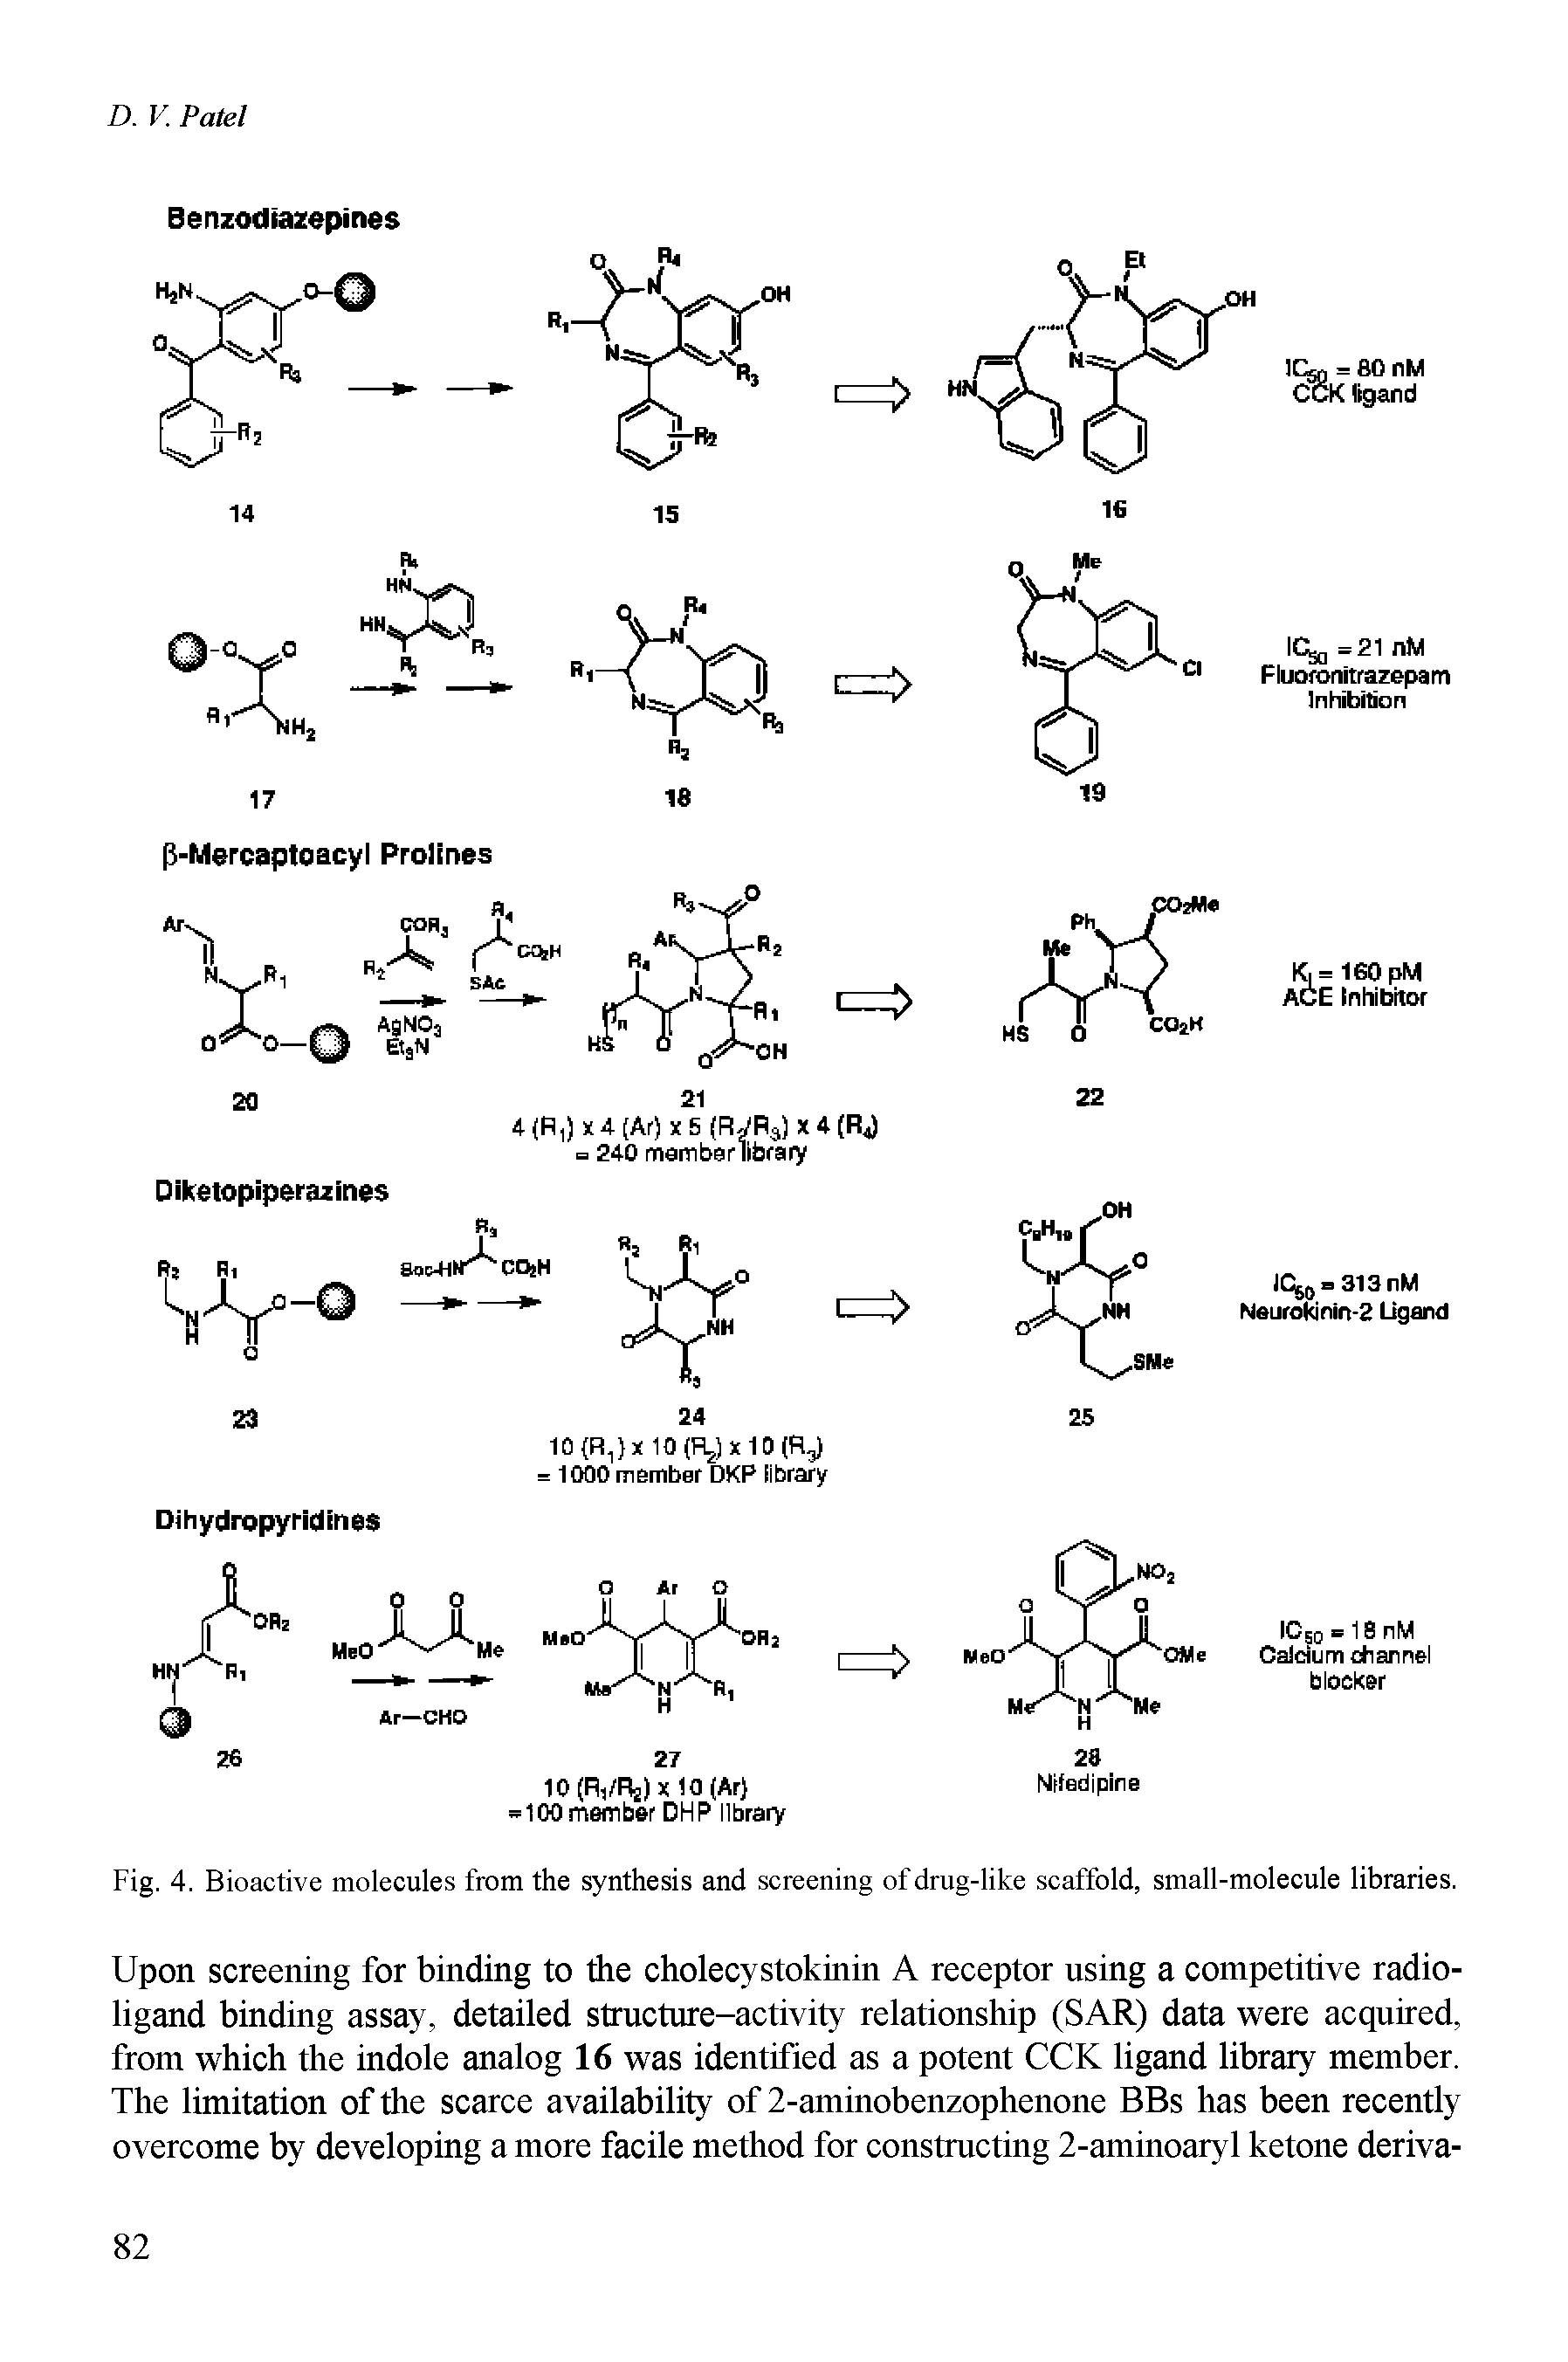 Fig. 4. Bioactive molecules from the synthesis and screening of drug-like scaffold, small-molecule libraries.